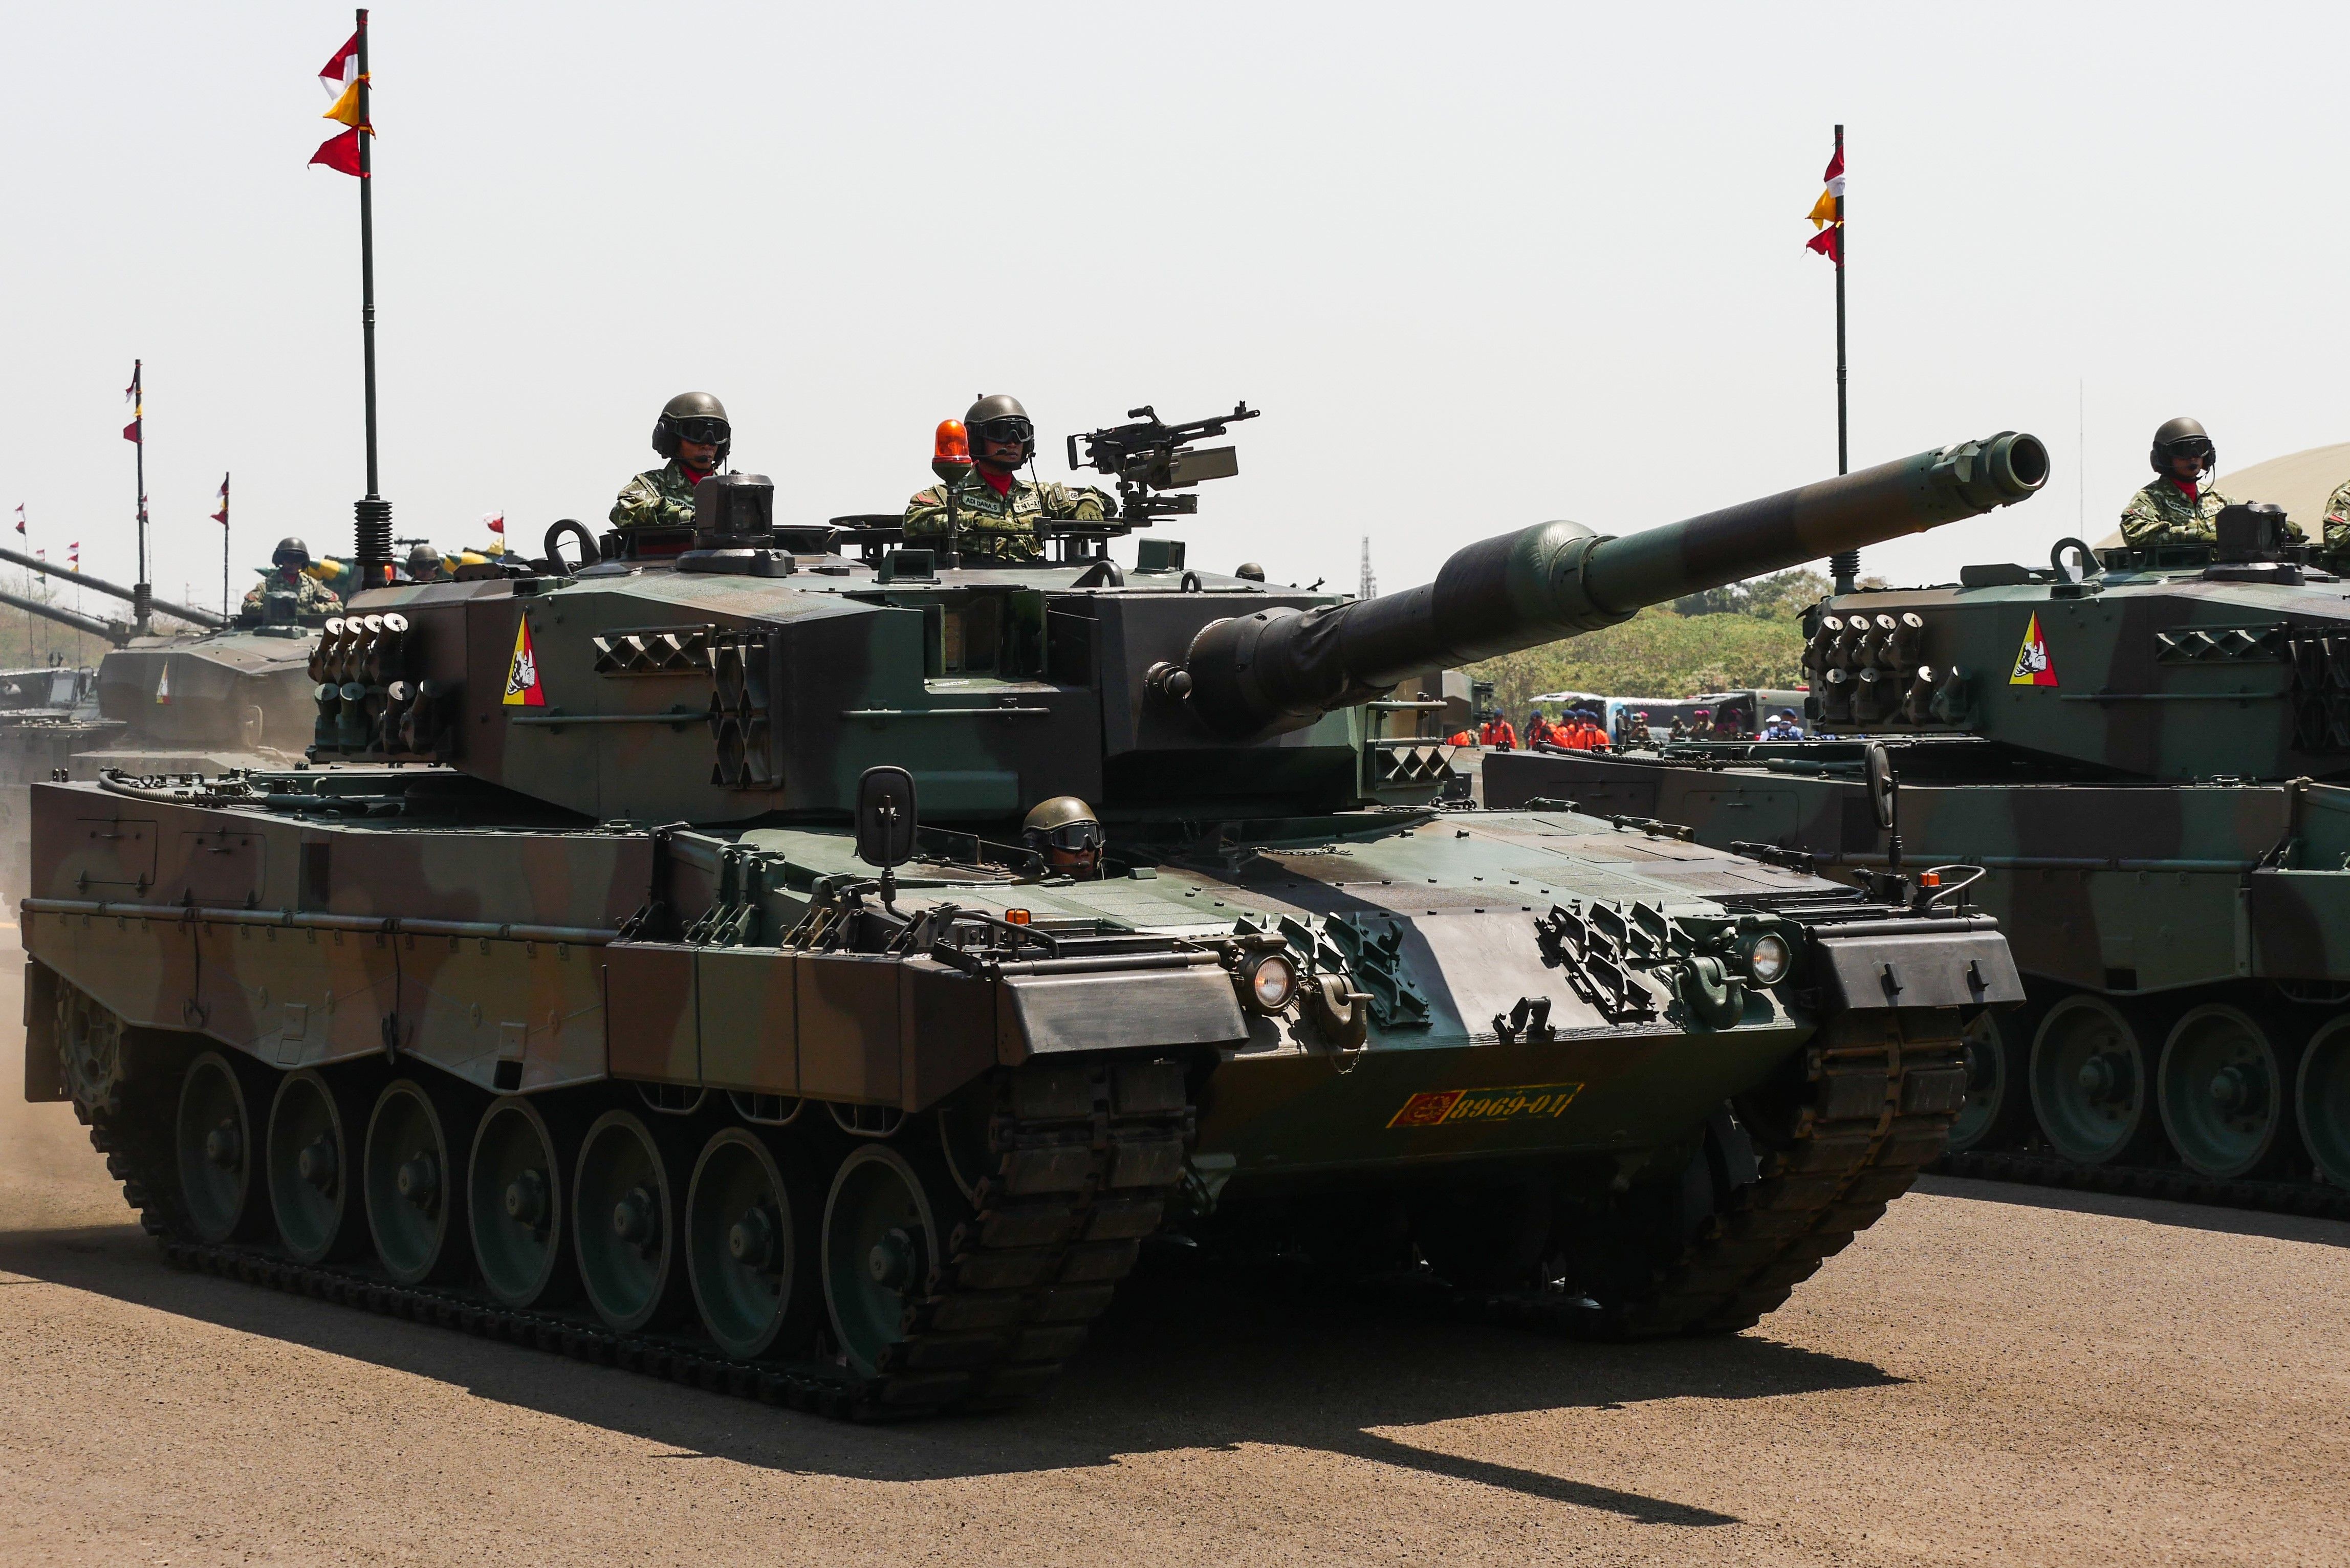 Why the Leopard 2 Is Such a Badass Tank: History, Specs, and More